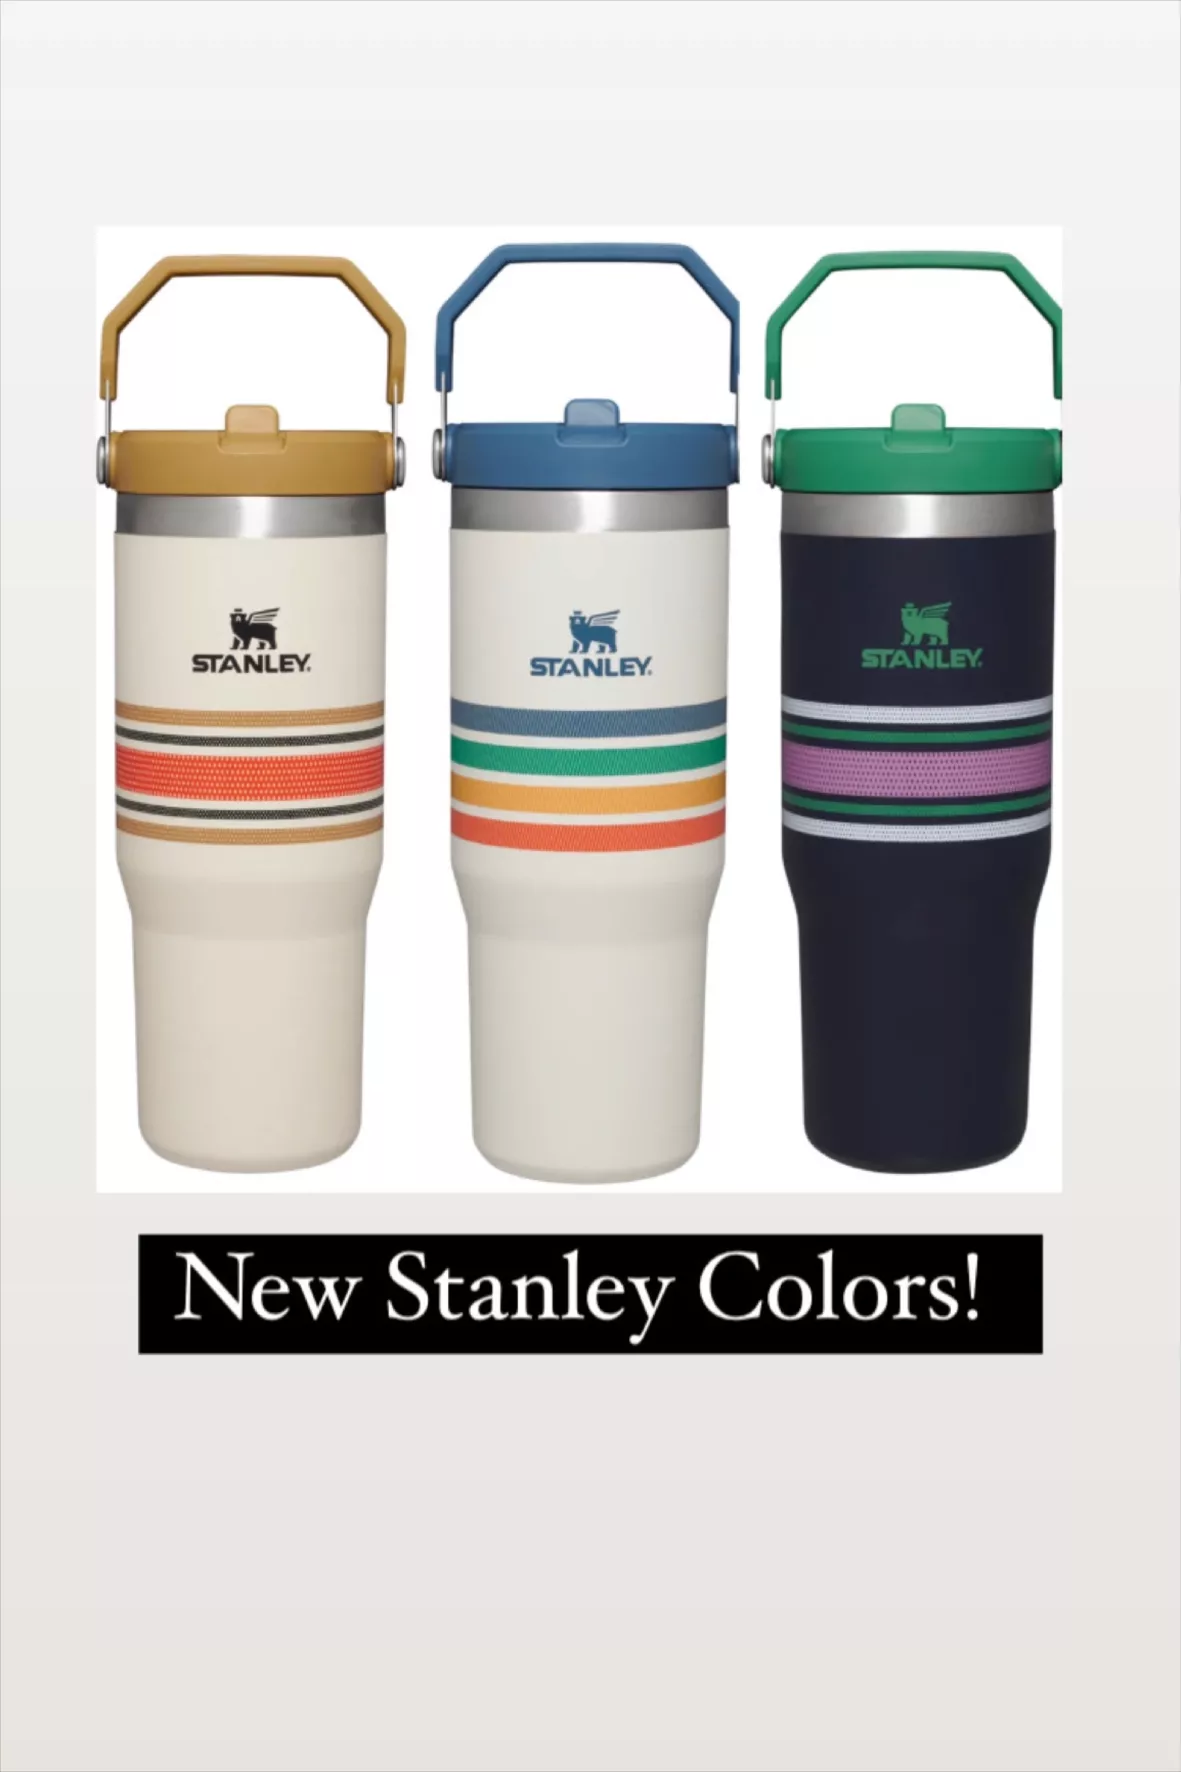 The Varsity Iceflow™ Flip Straw … curated on LTK